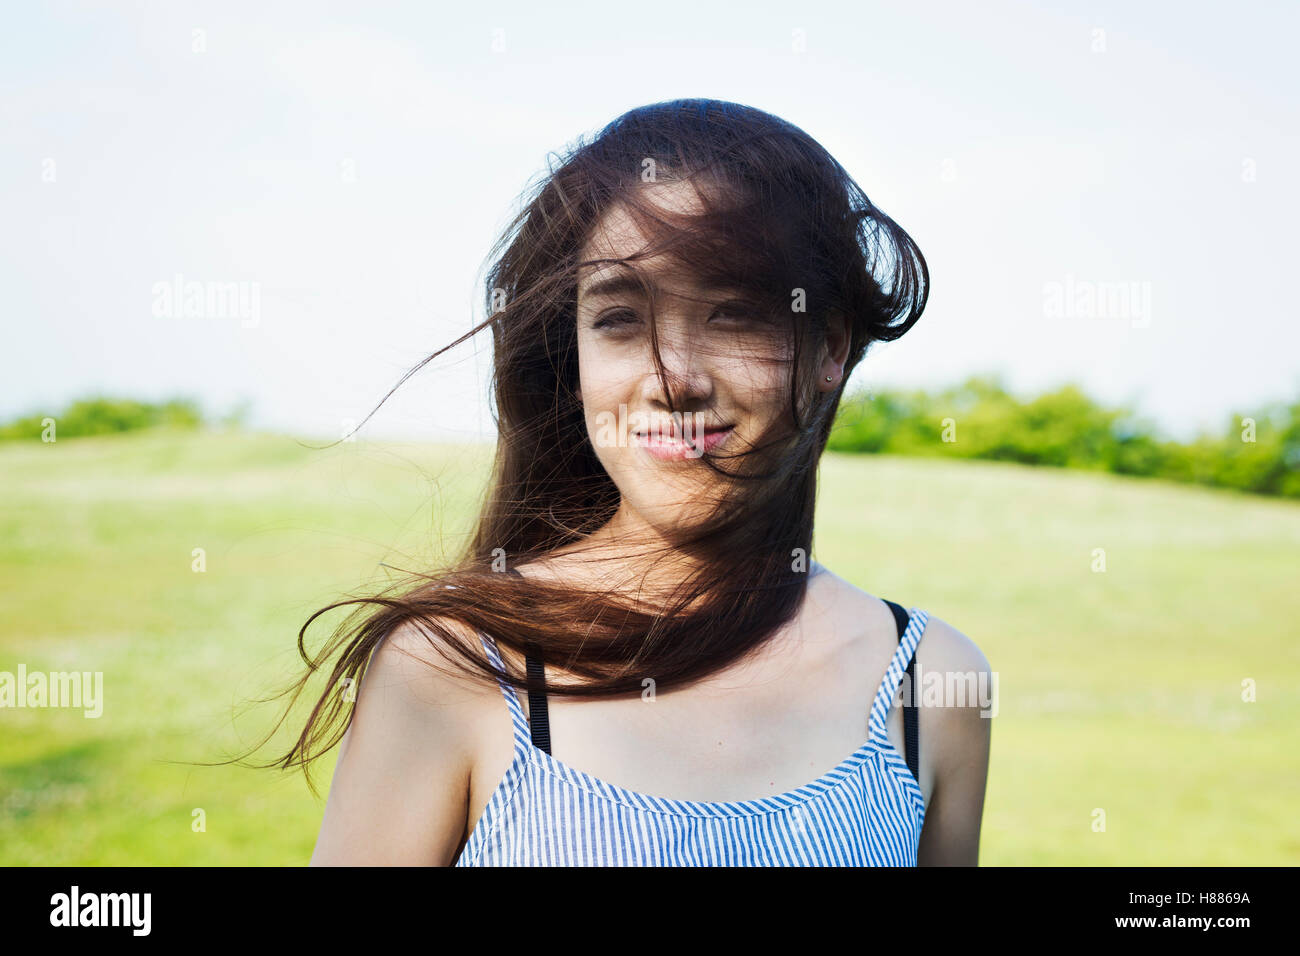 Portrait of a smiling young woman with long brown hair. Stock Photo